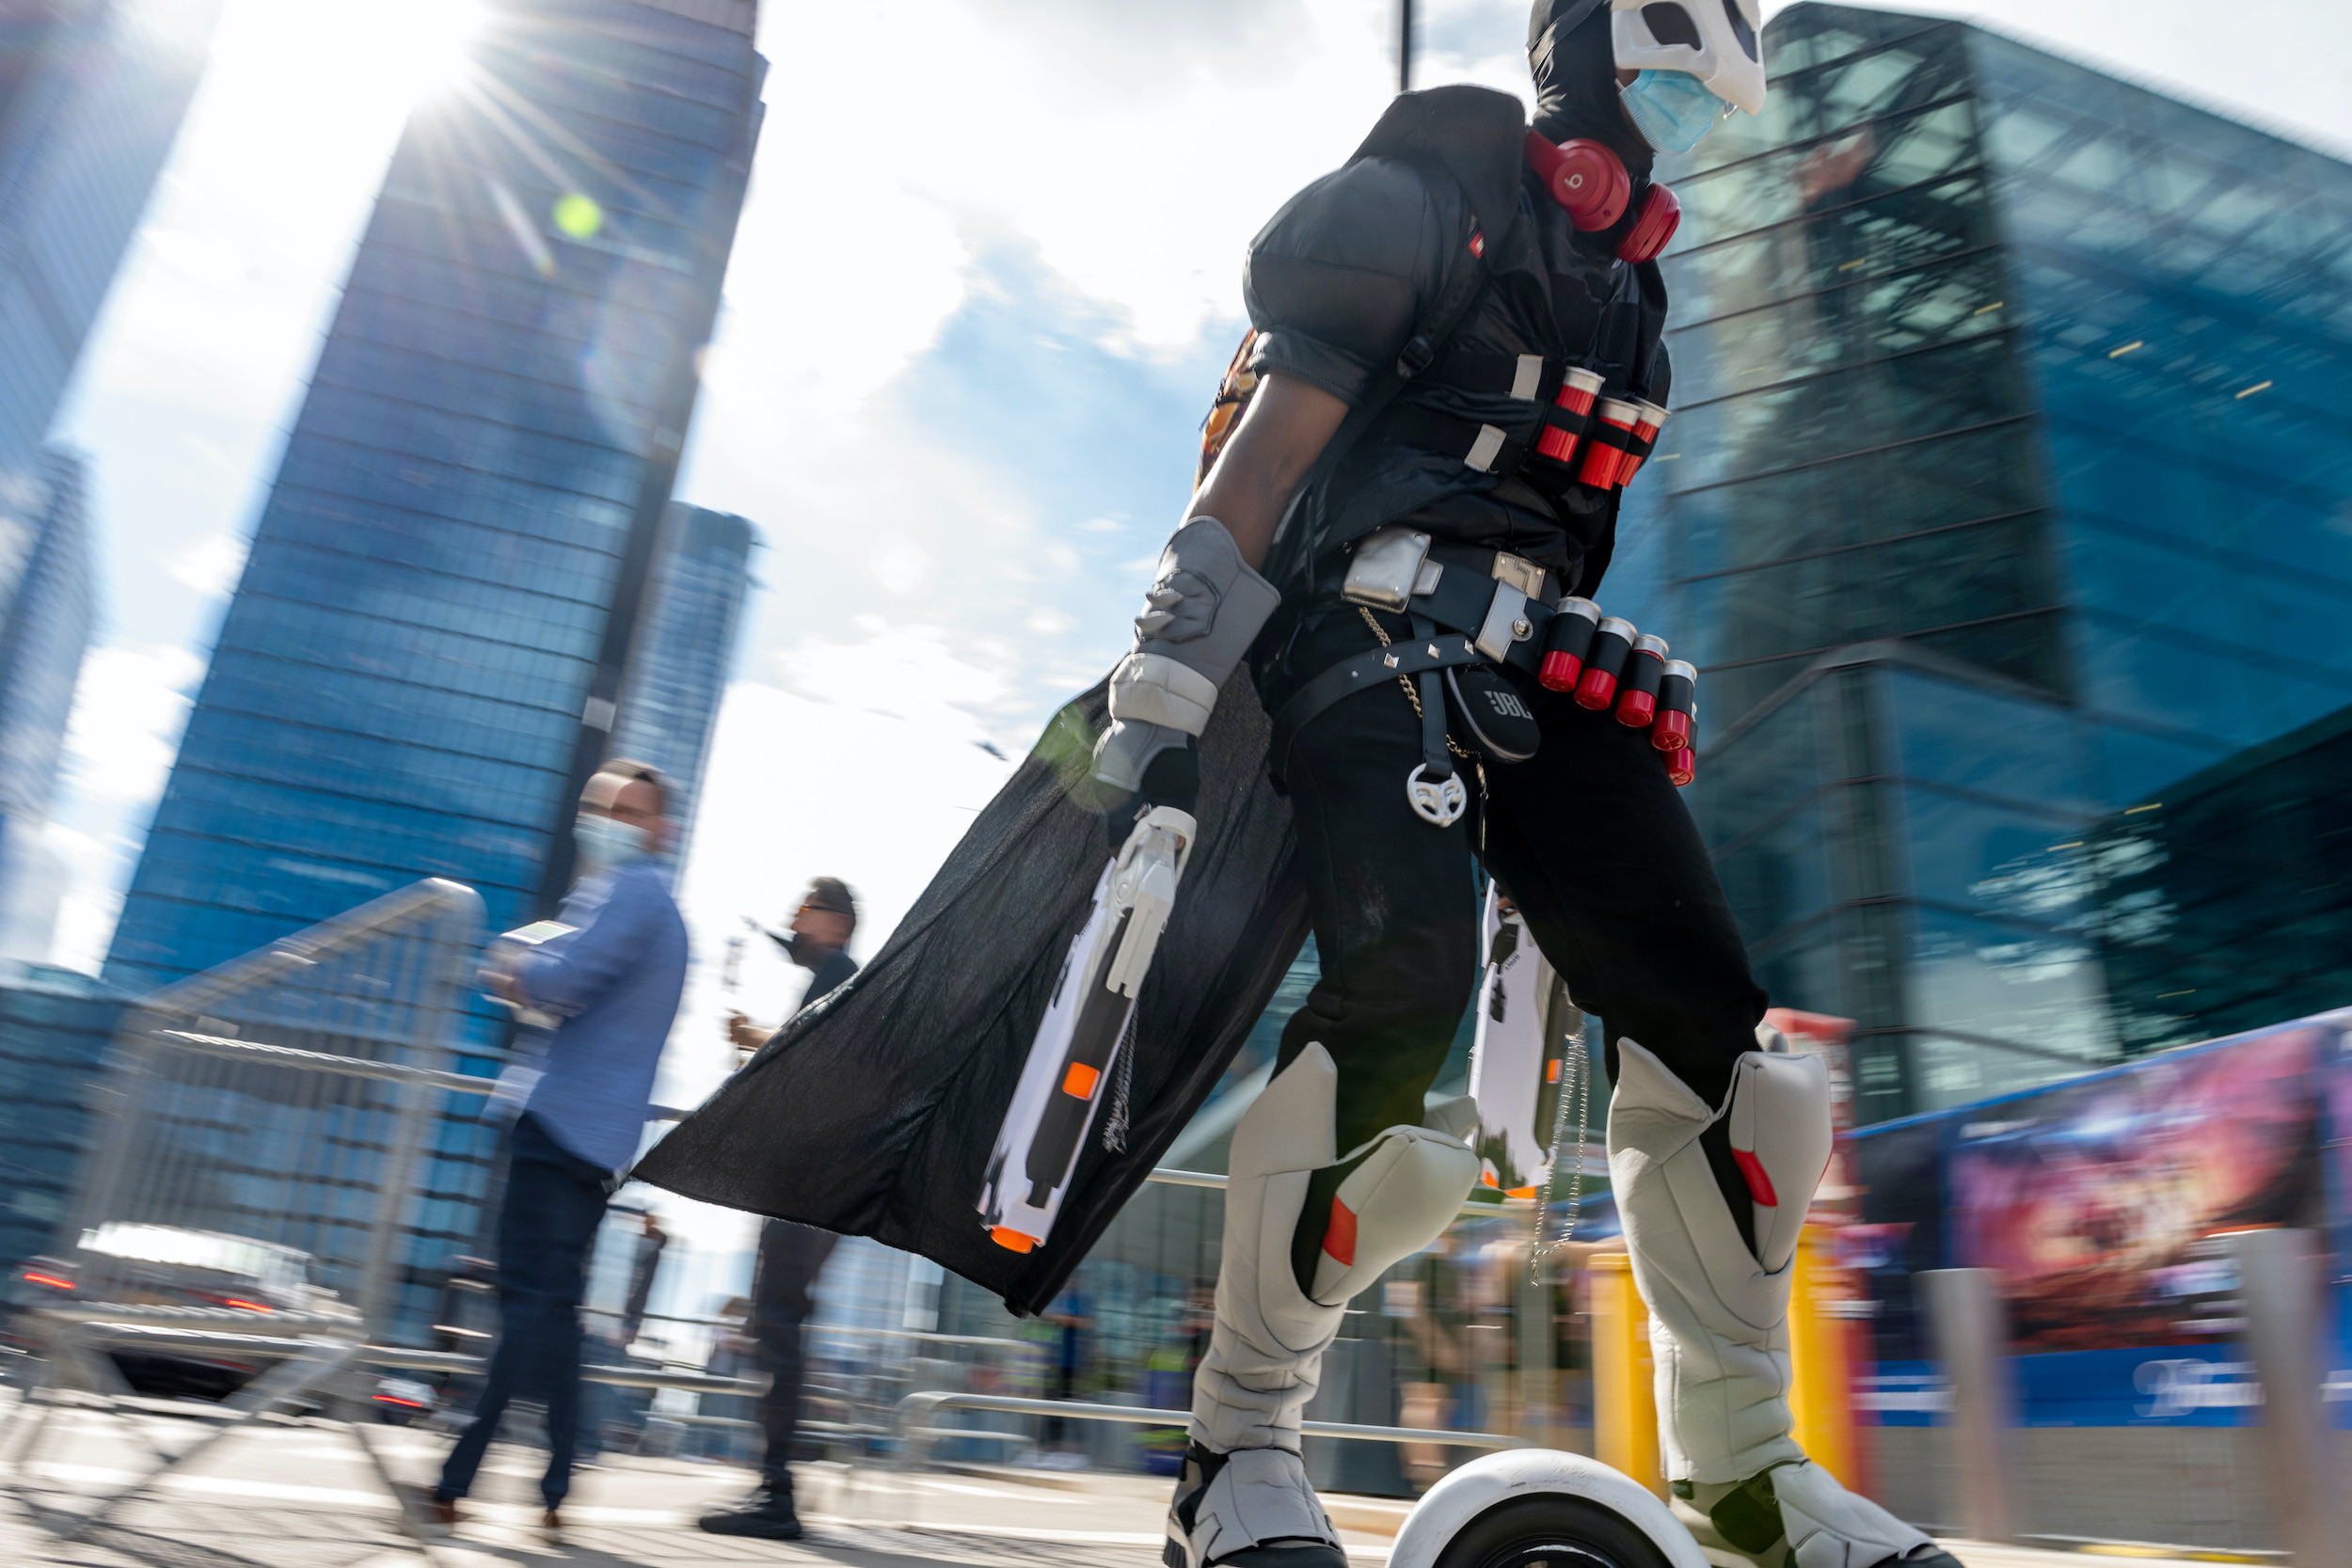 A cosplayer dressed as Reaper rides on a one wheel electric scoote